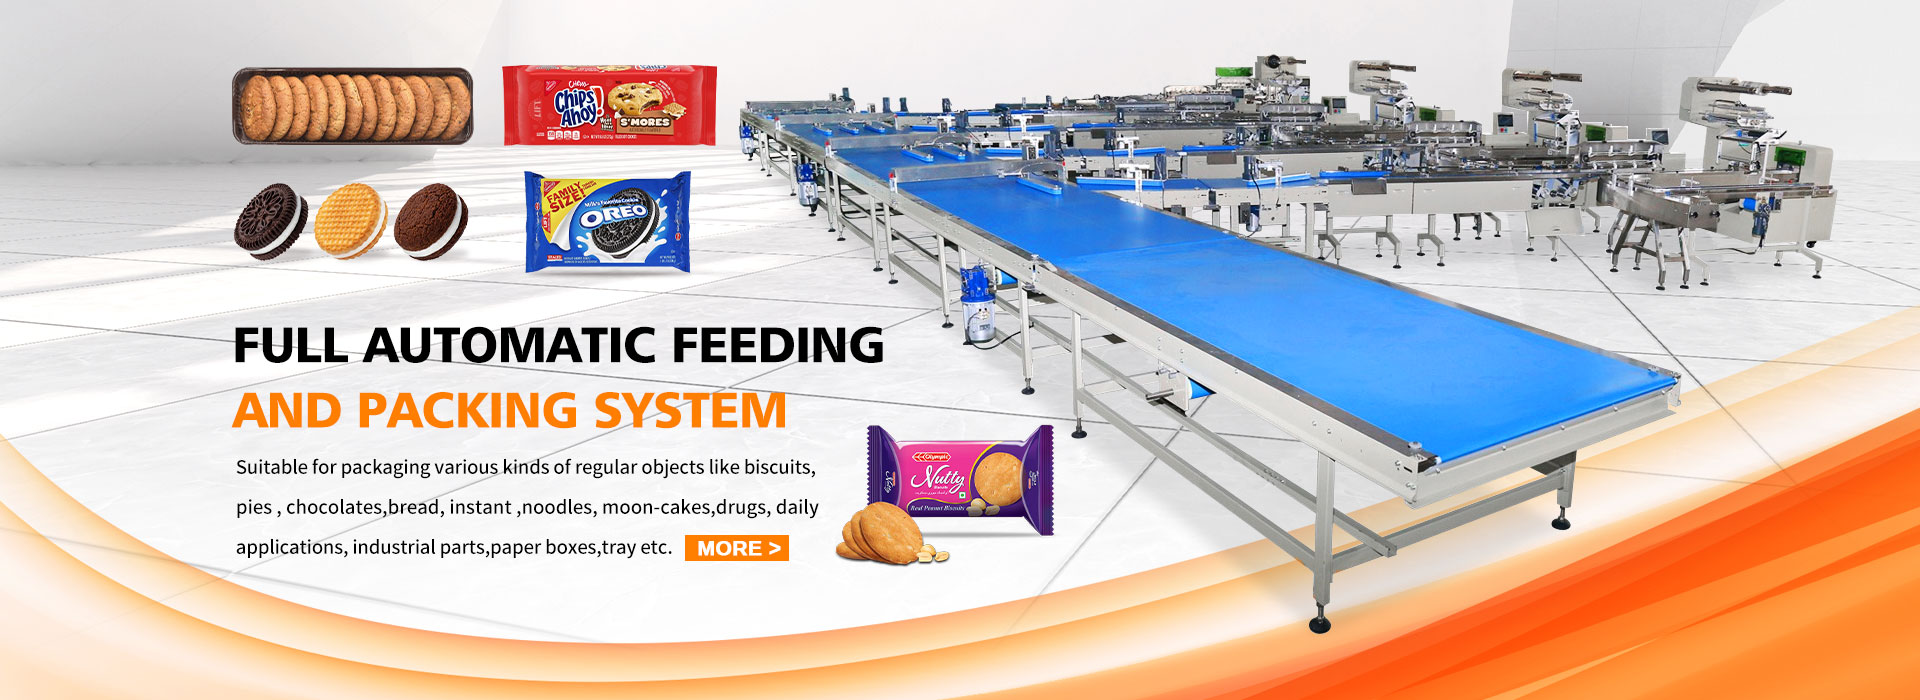 Automatic Feeding And Packing System